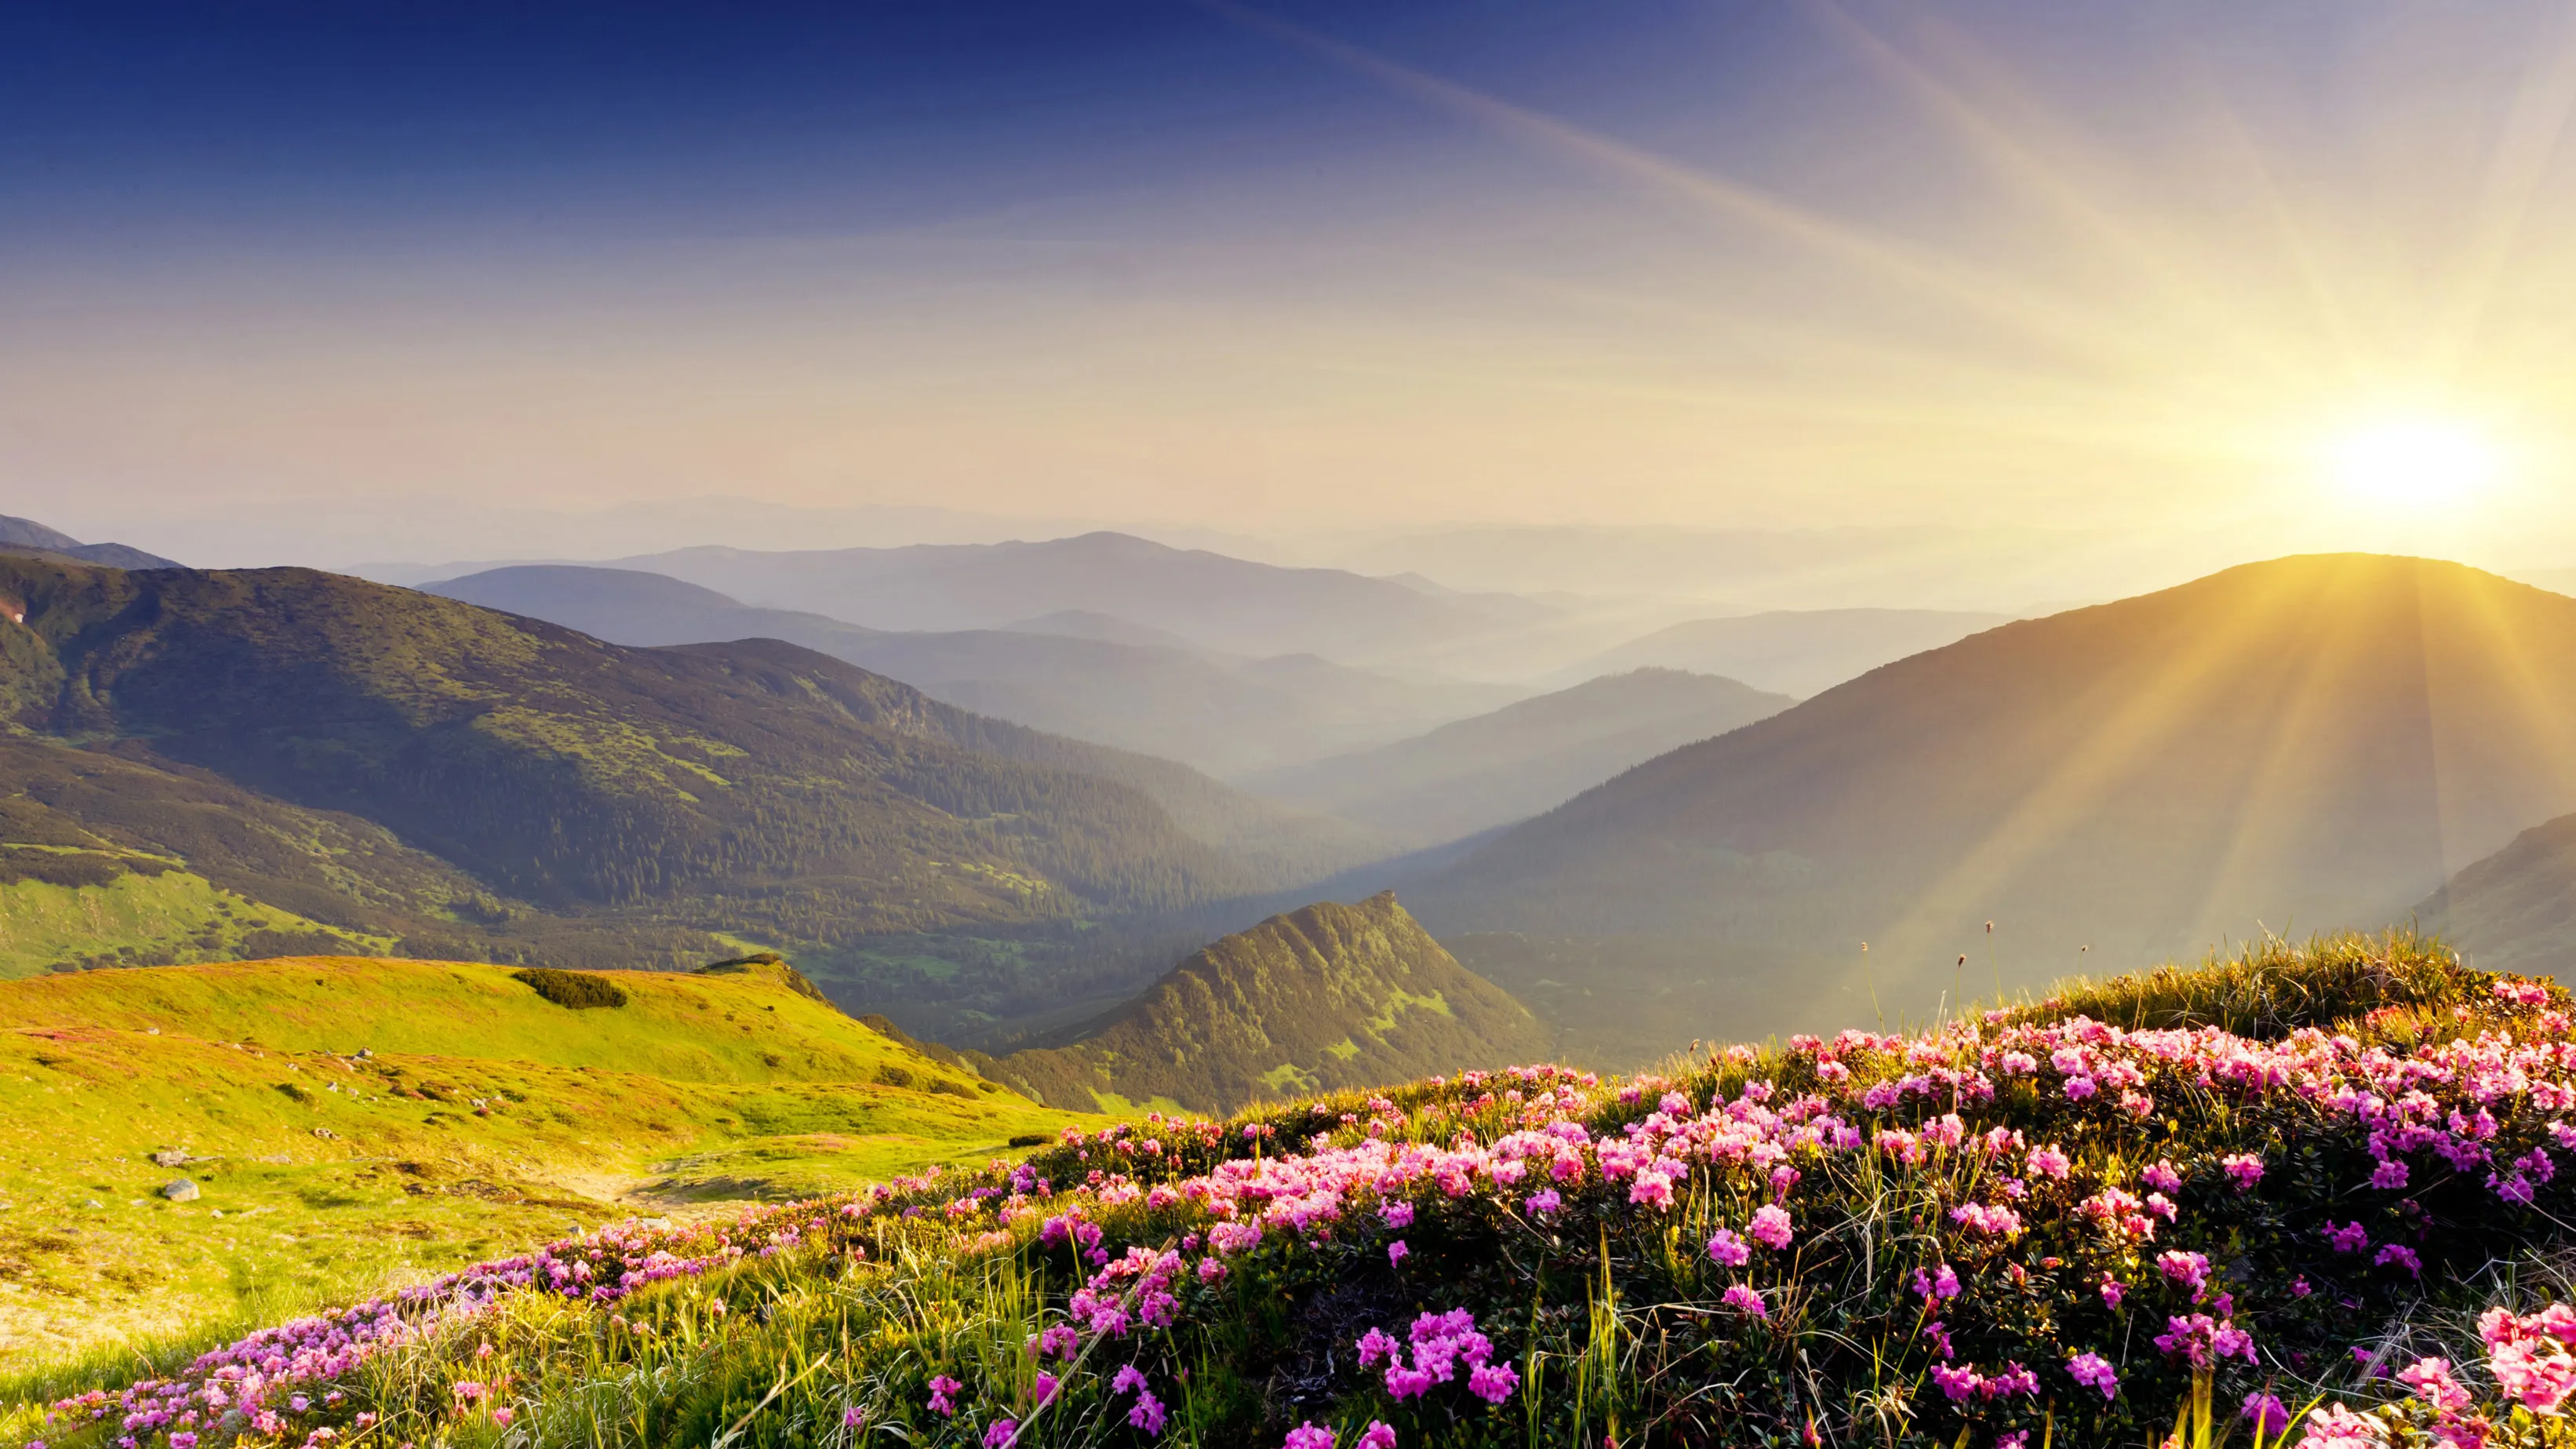 Mountain Valley with a setting sun and pink flowers